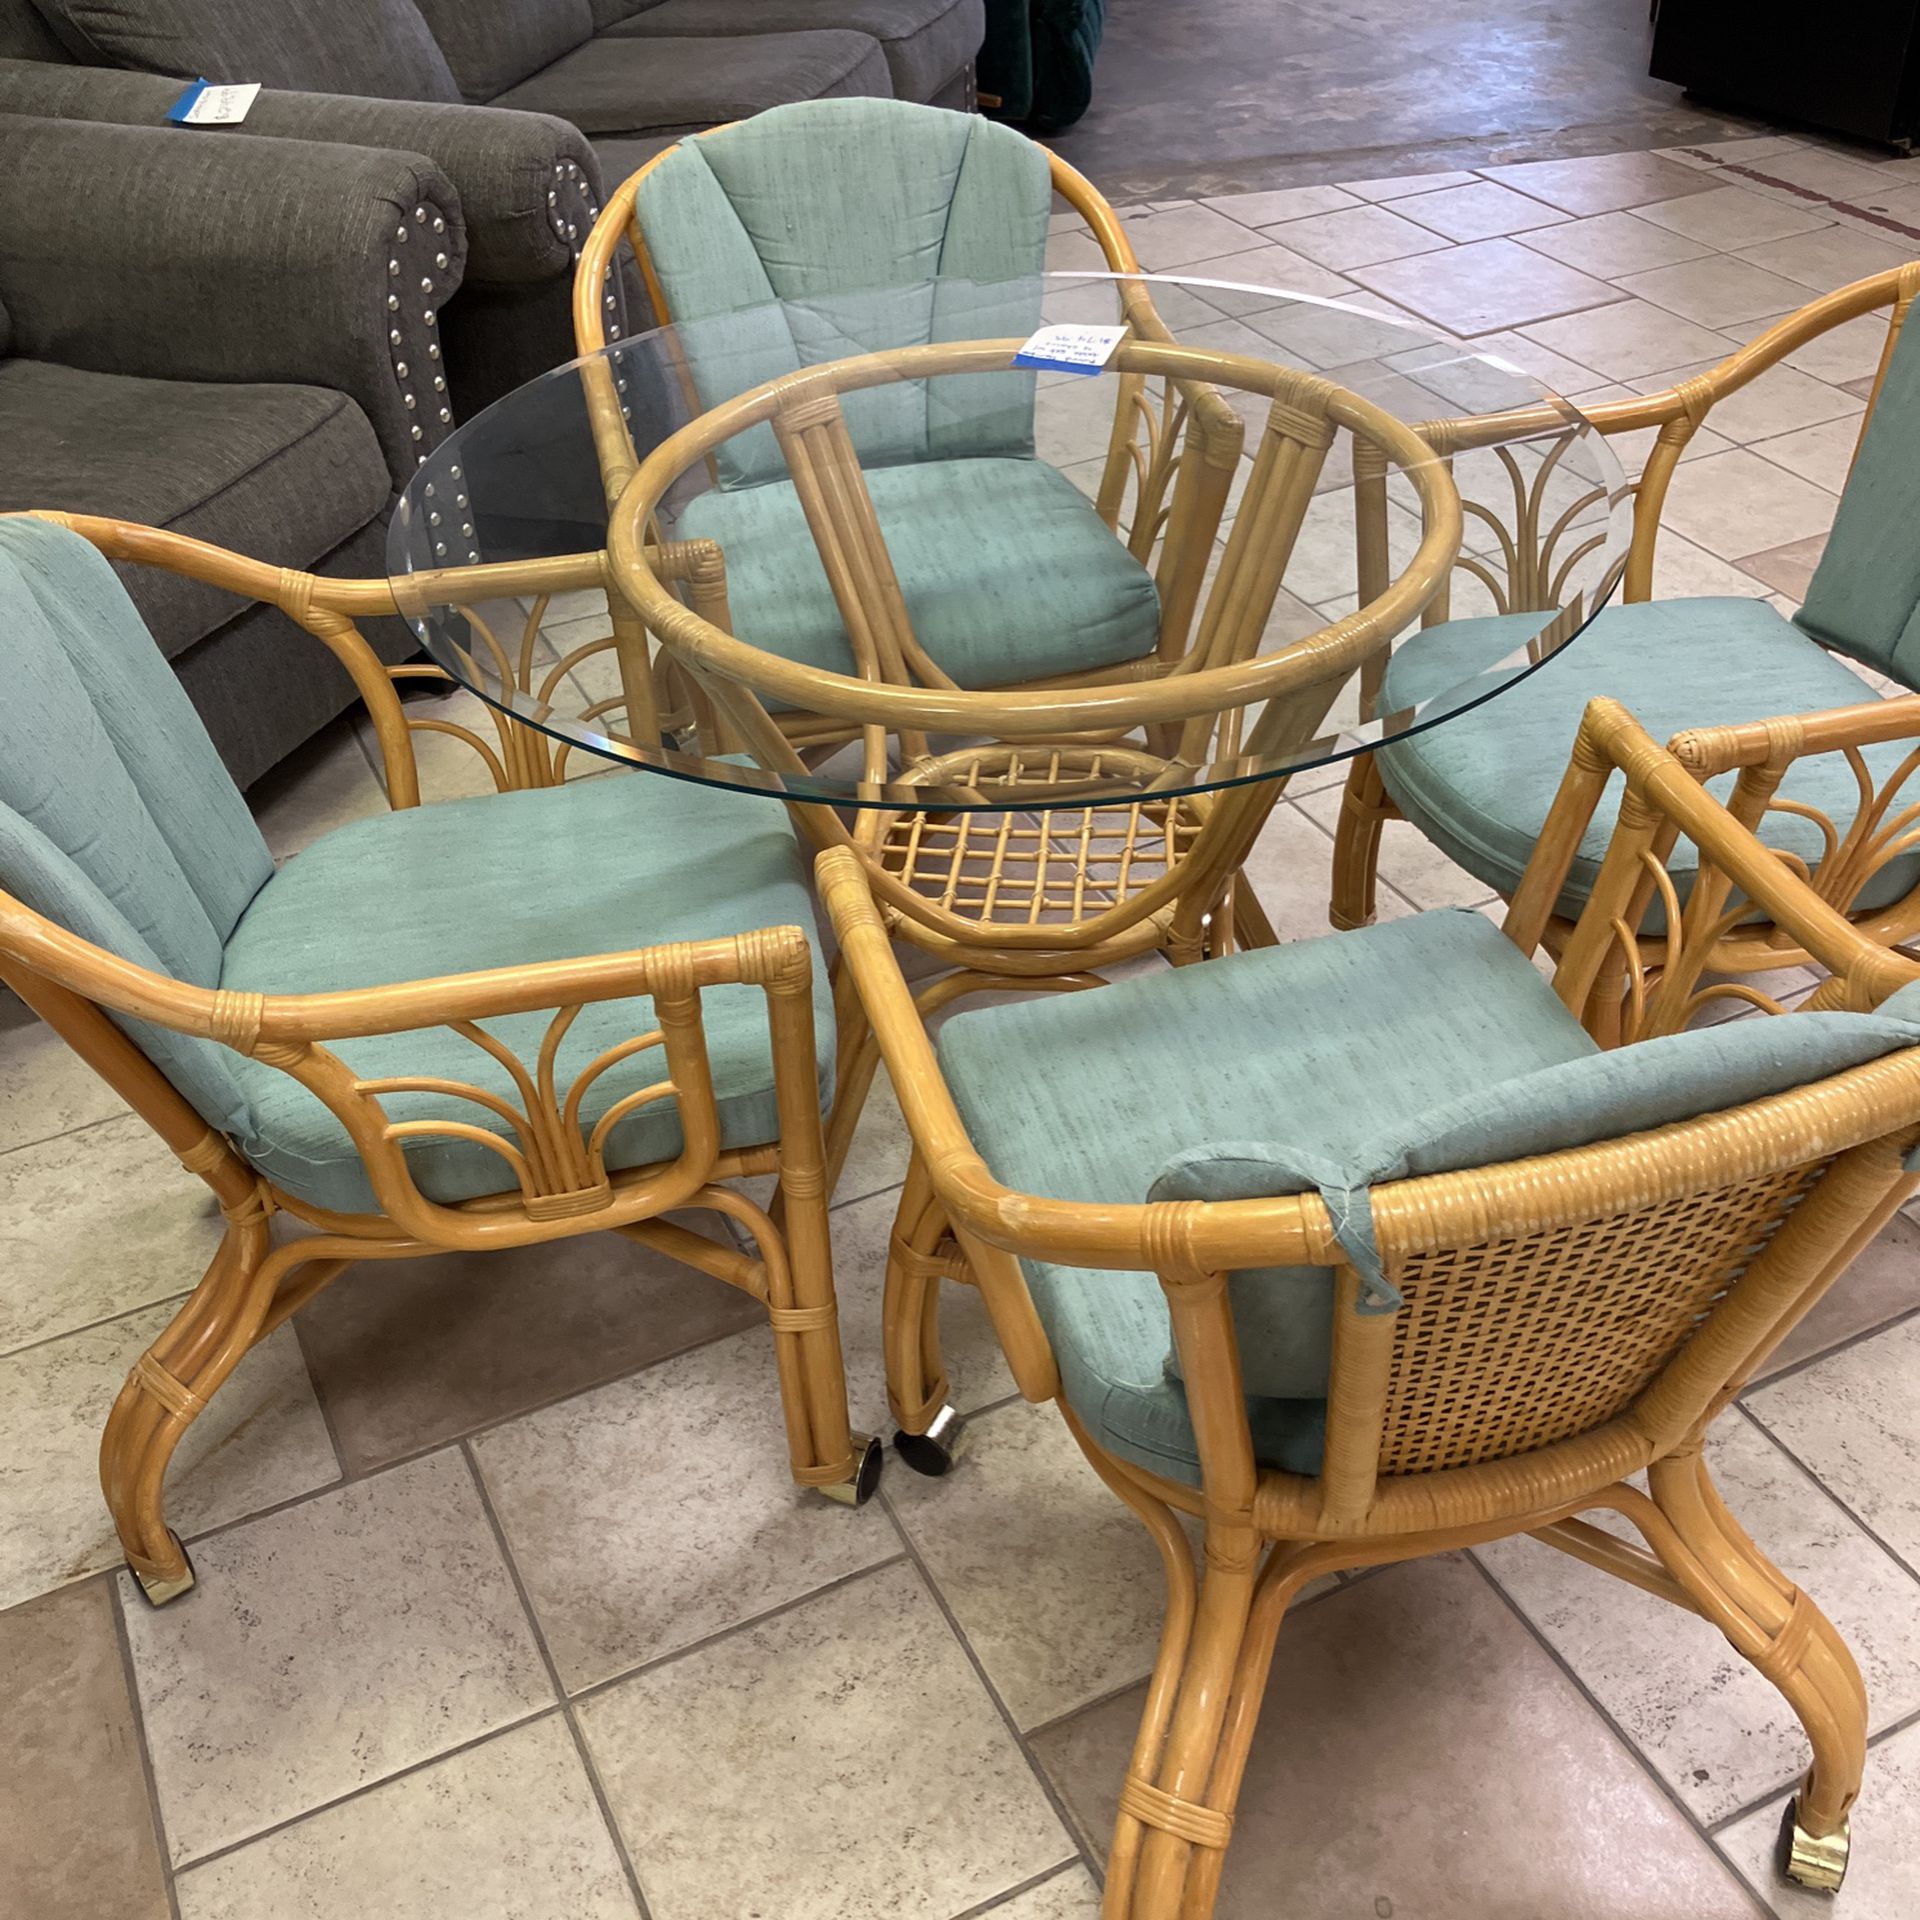 Wicker Table With 4 Rolling Chairs 